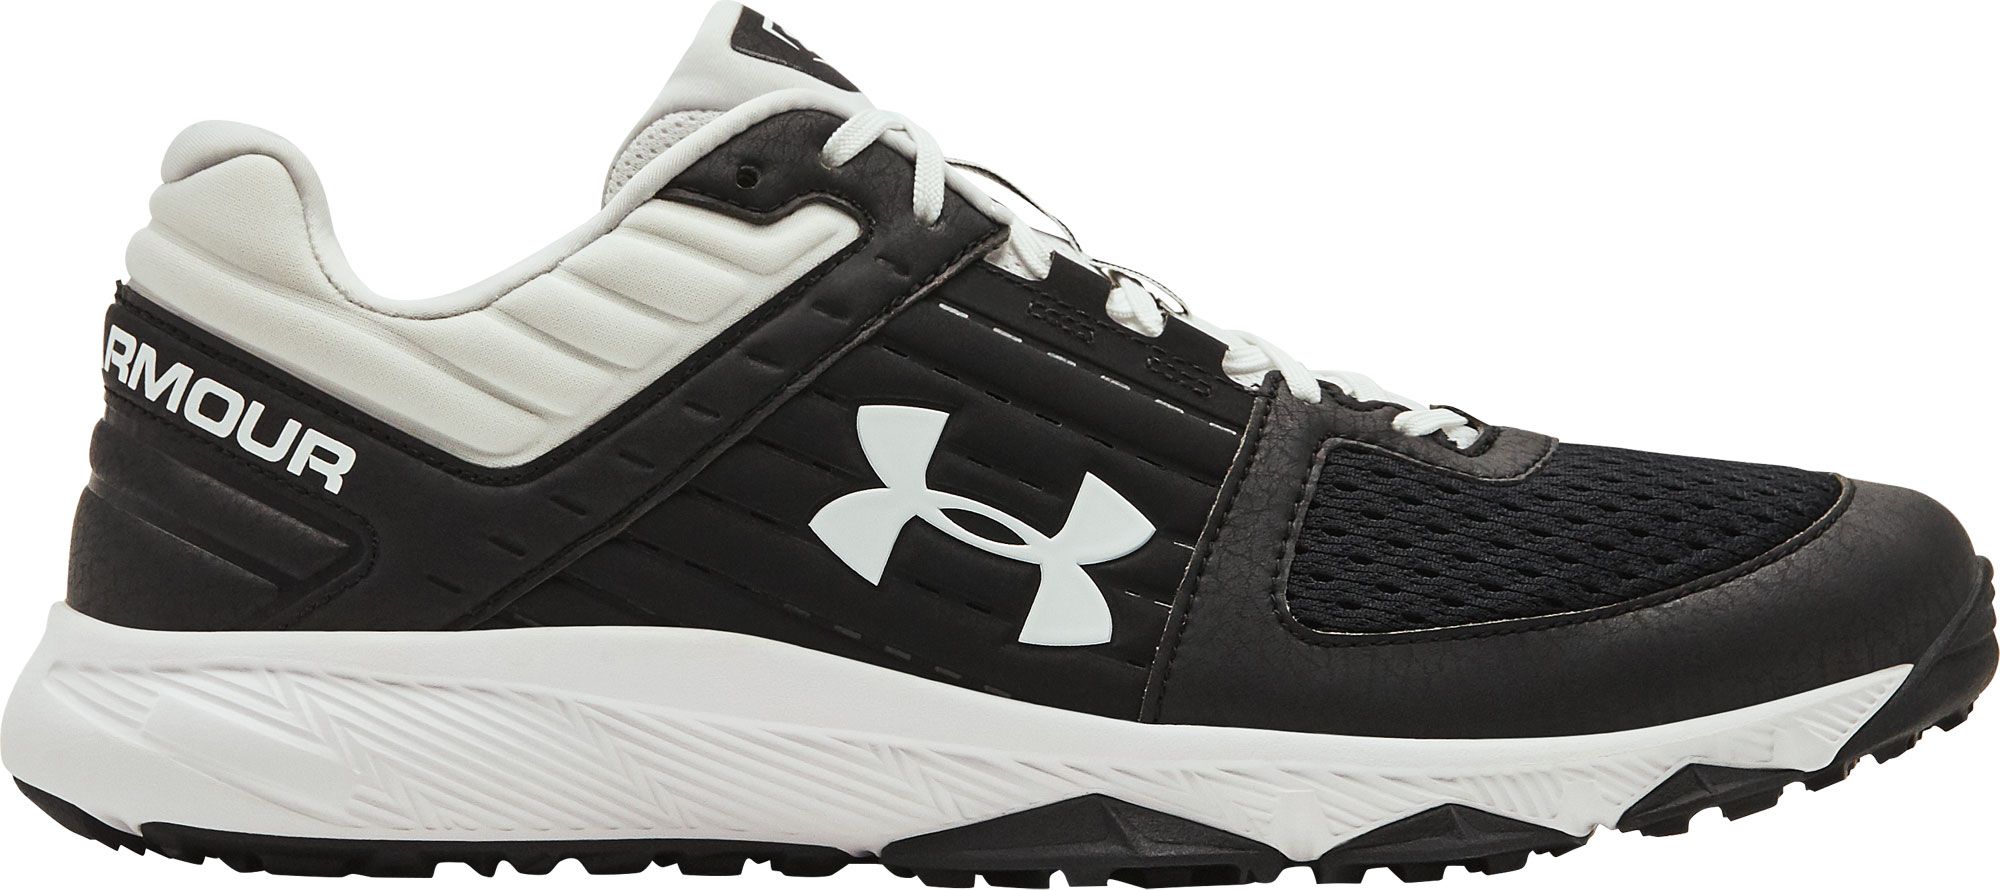 upcoming under armour shoes